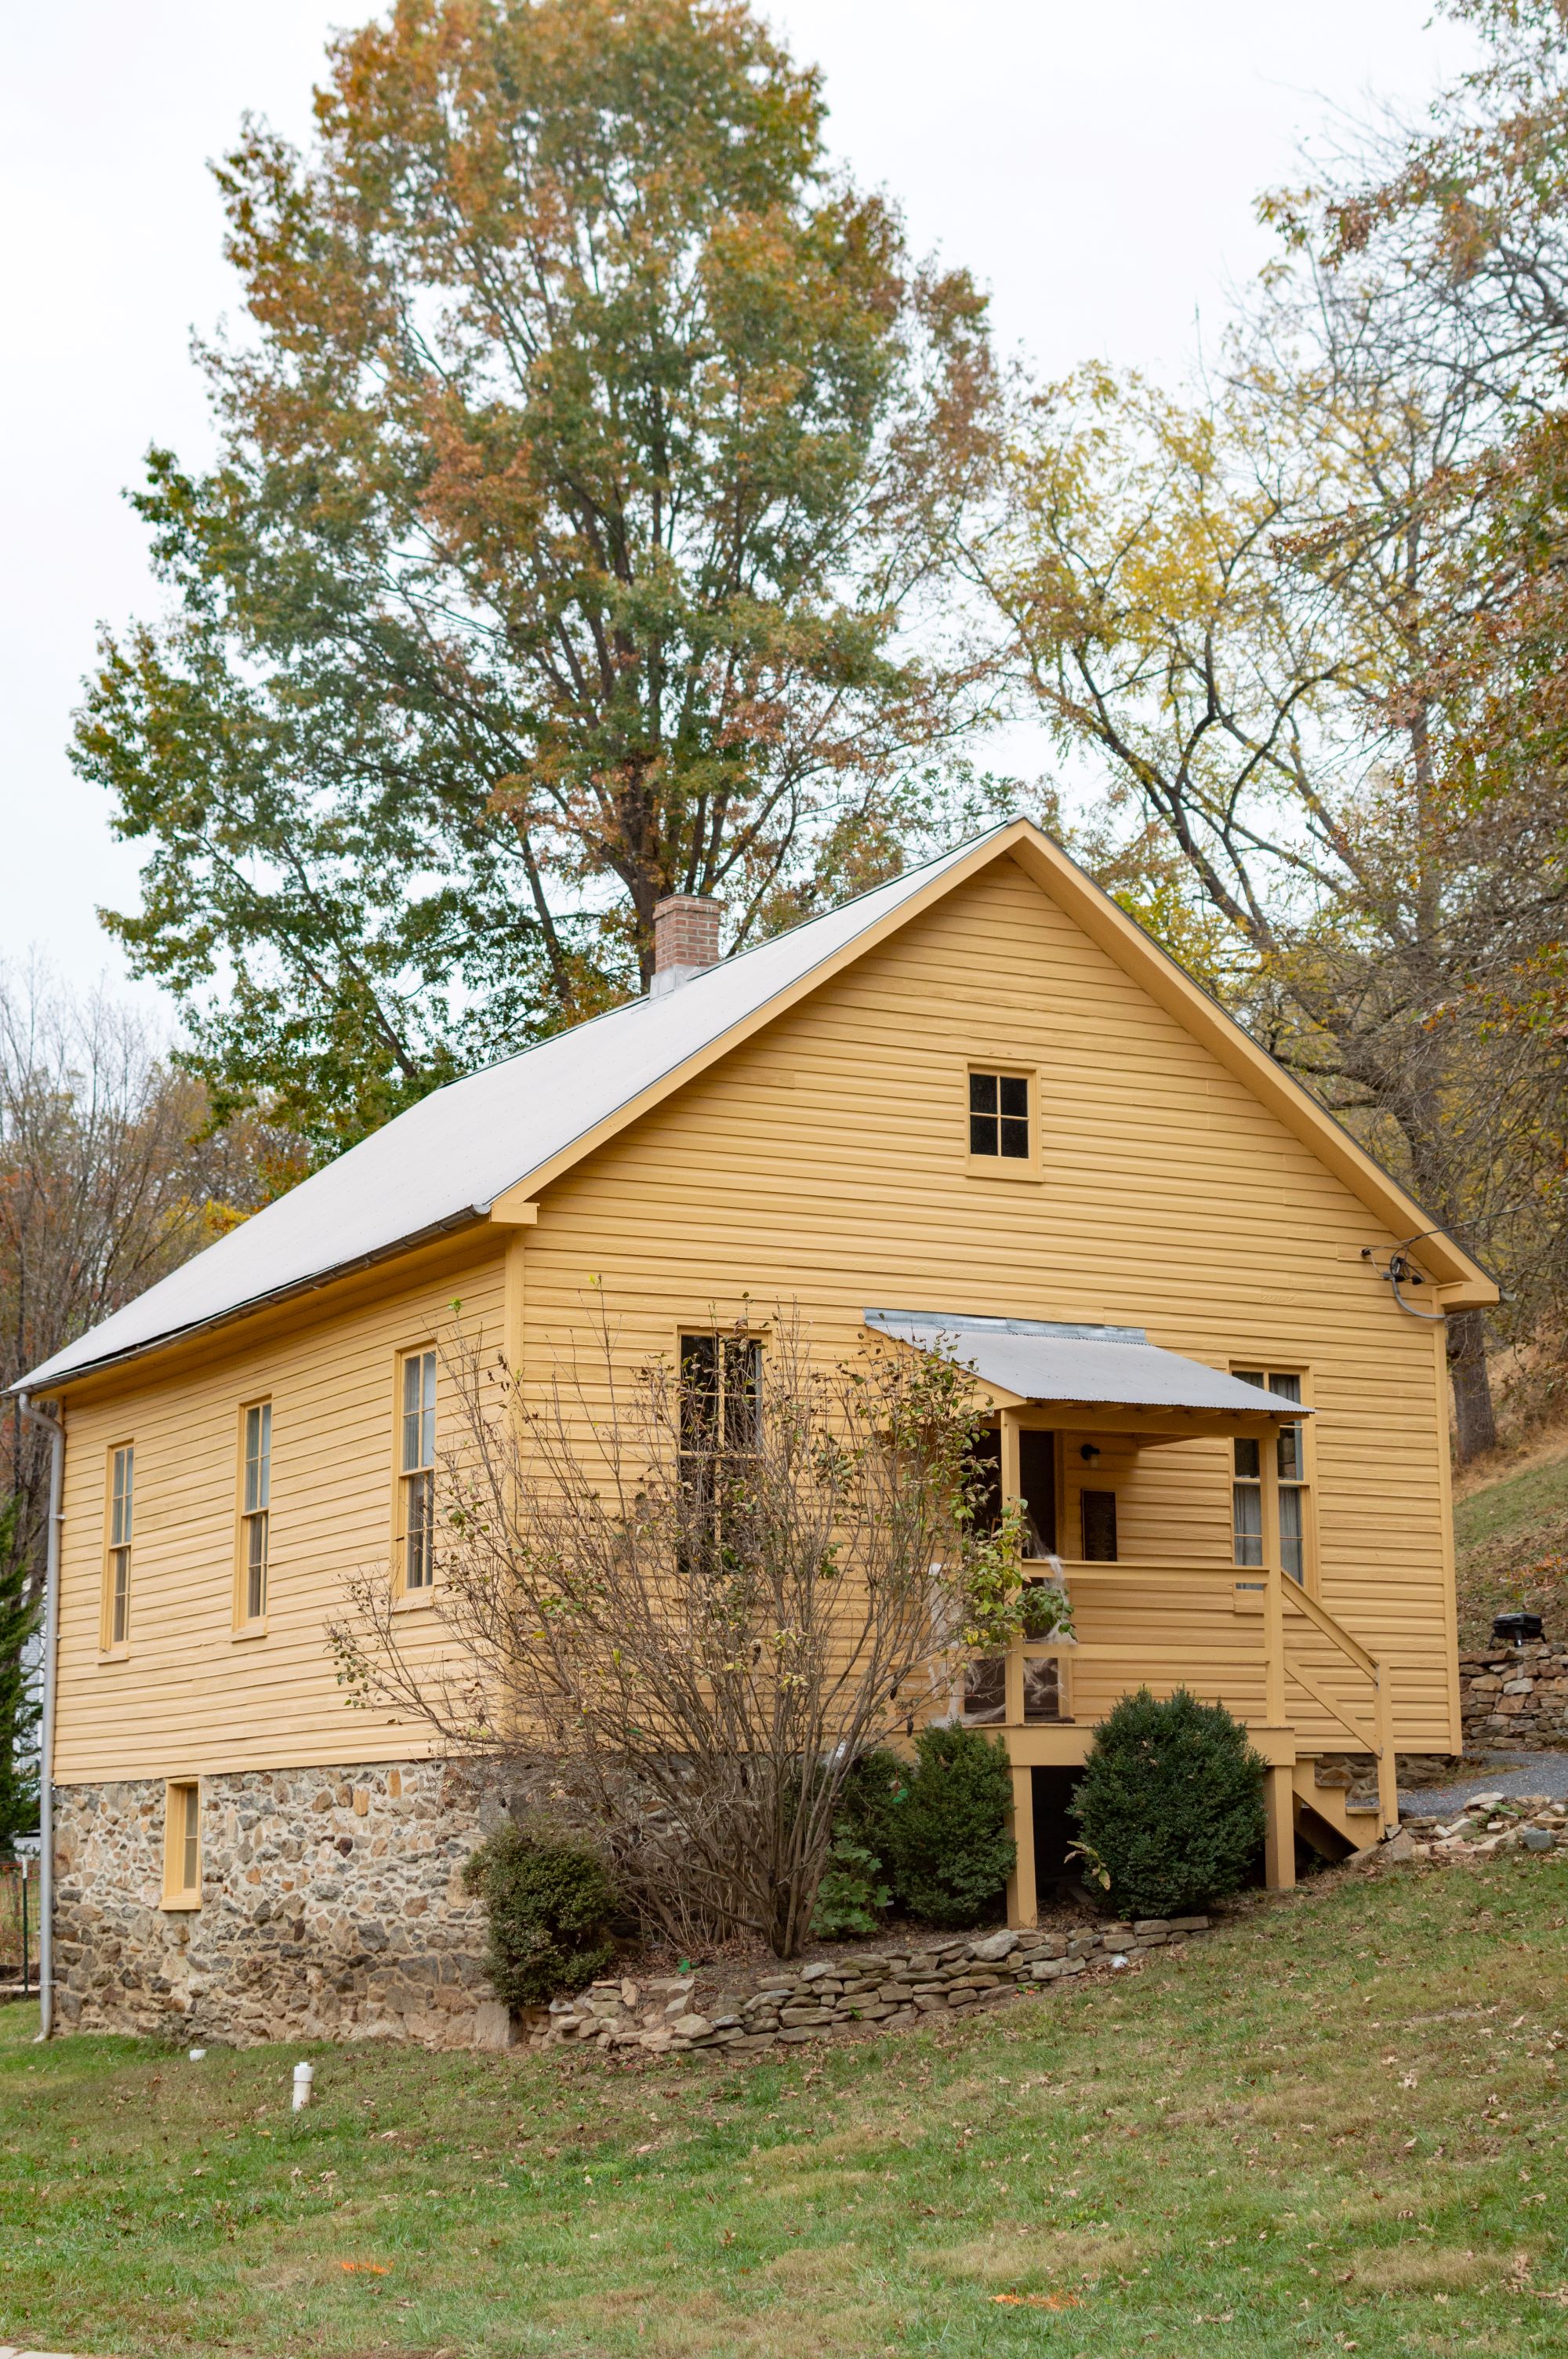 Historic Sykesville Colored Schoolhouse, an early 20th century building surrounded by trees